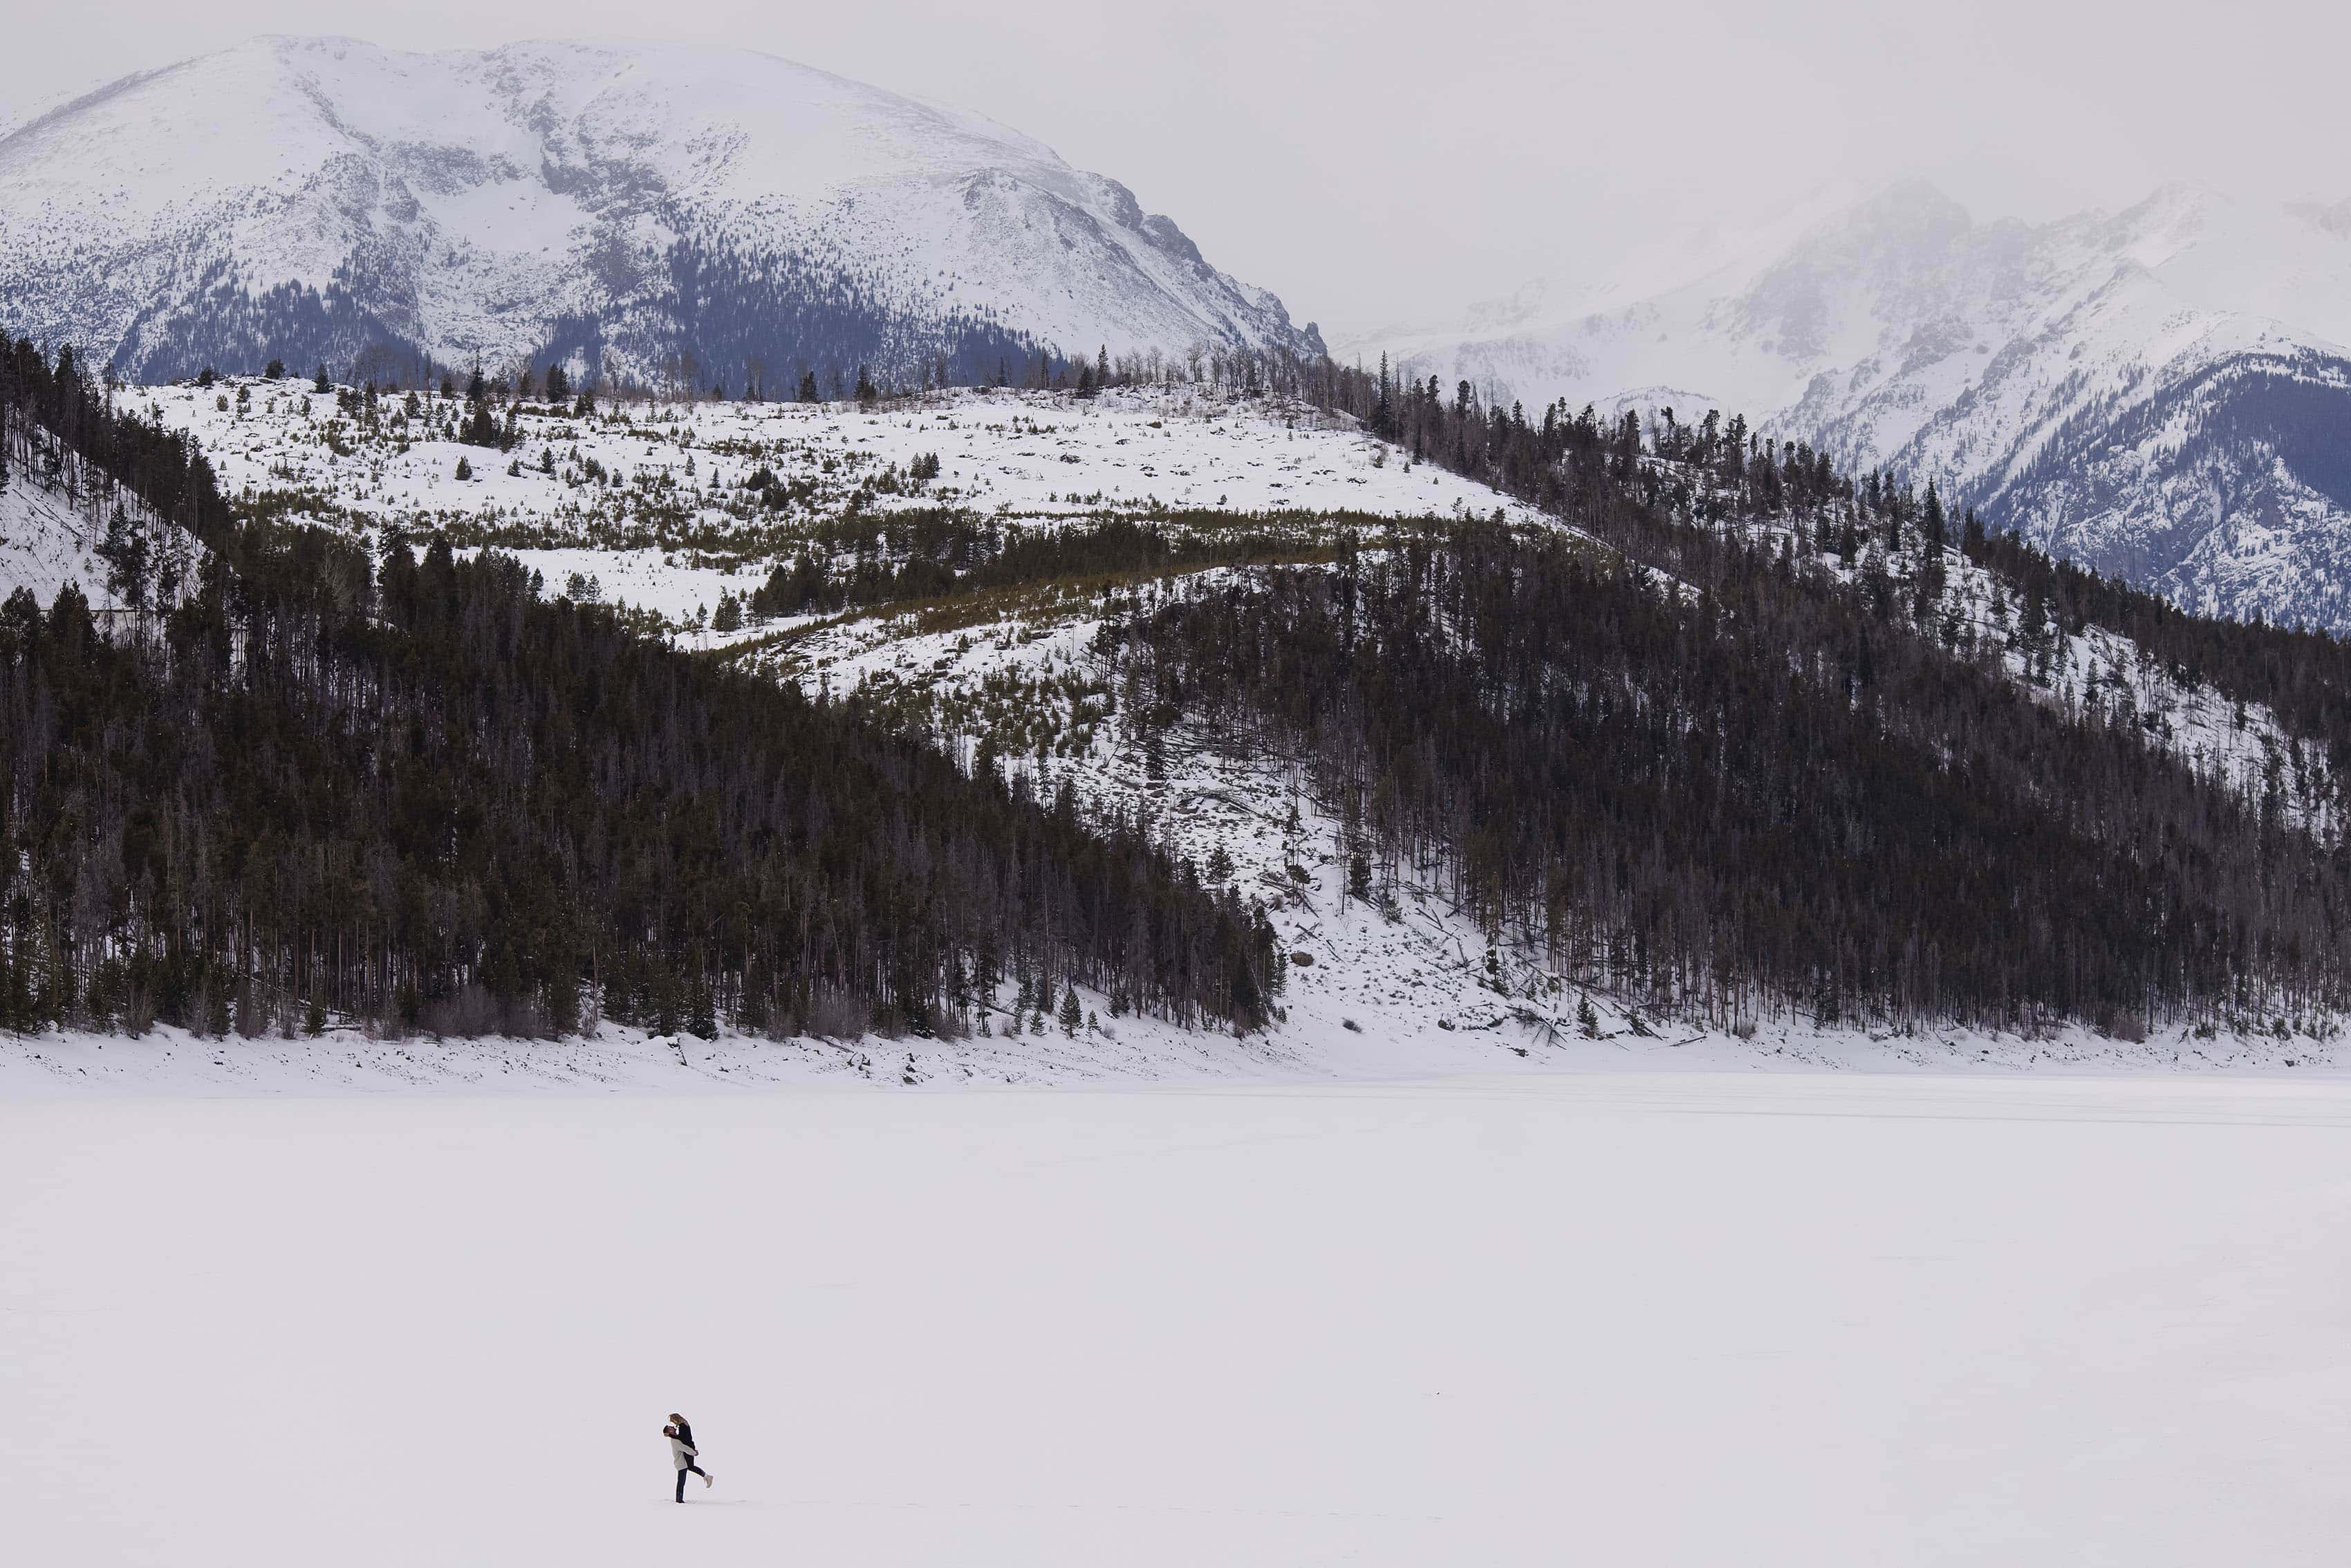 A couple embraces on Lake Dillon in the snow near the Tenmile Range